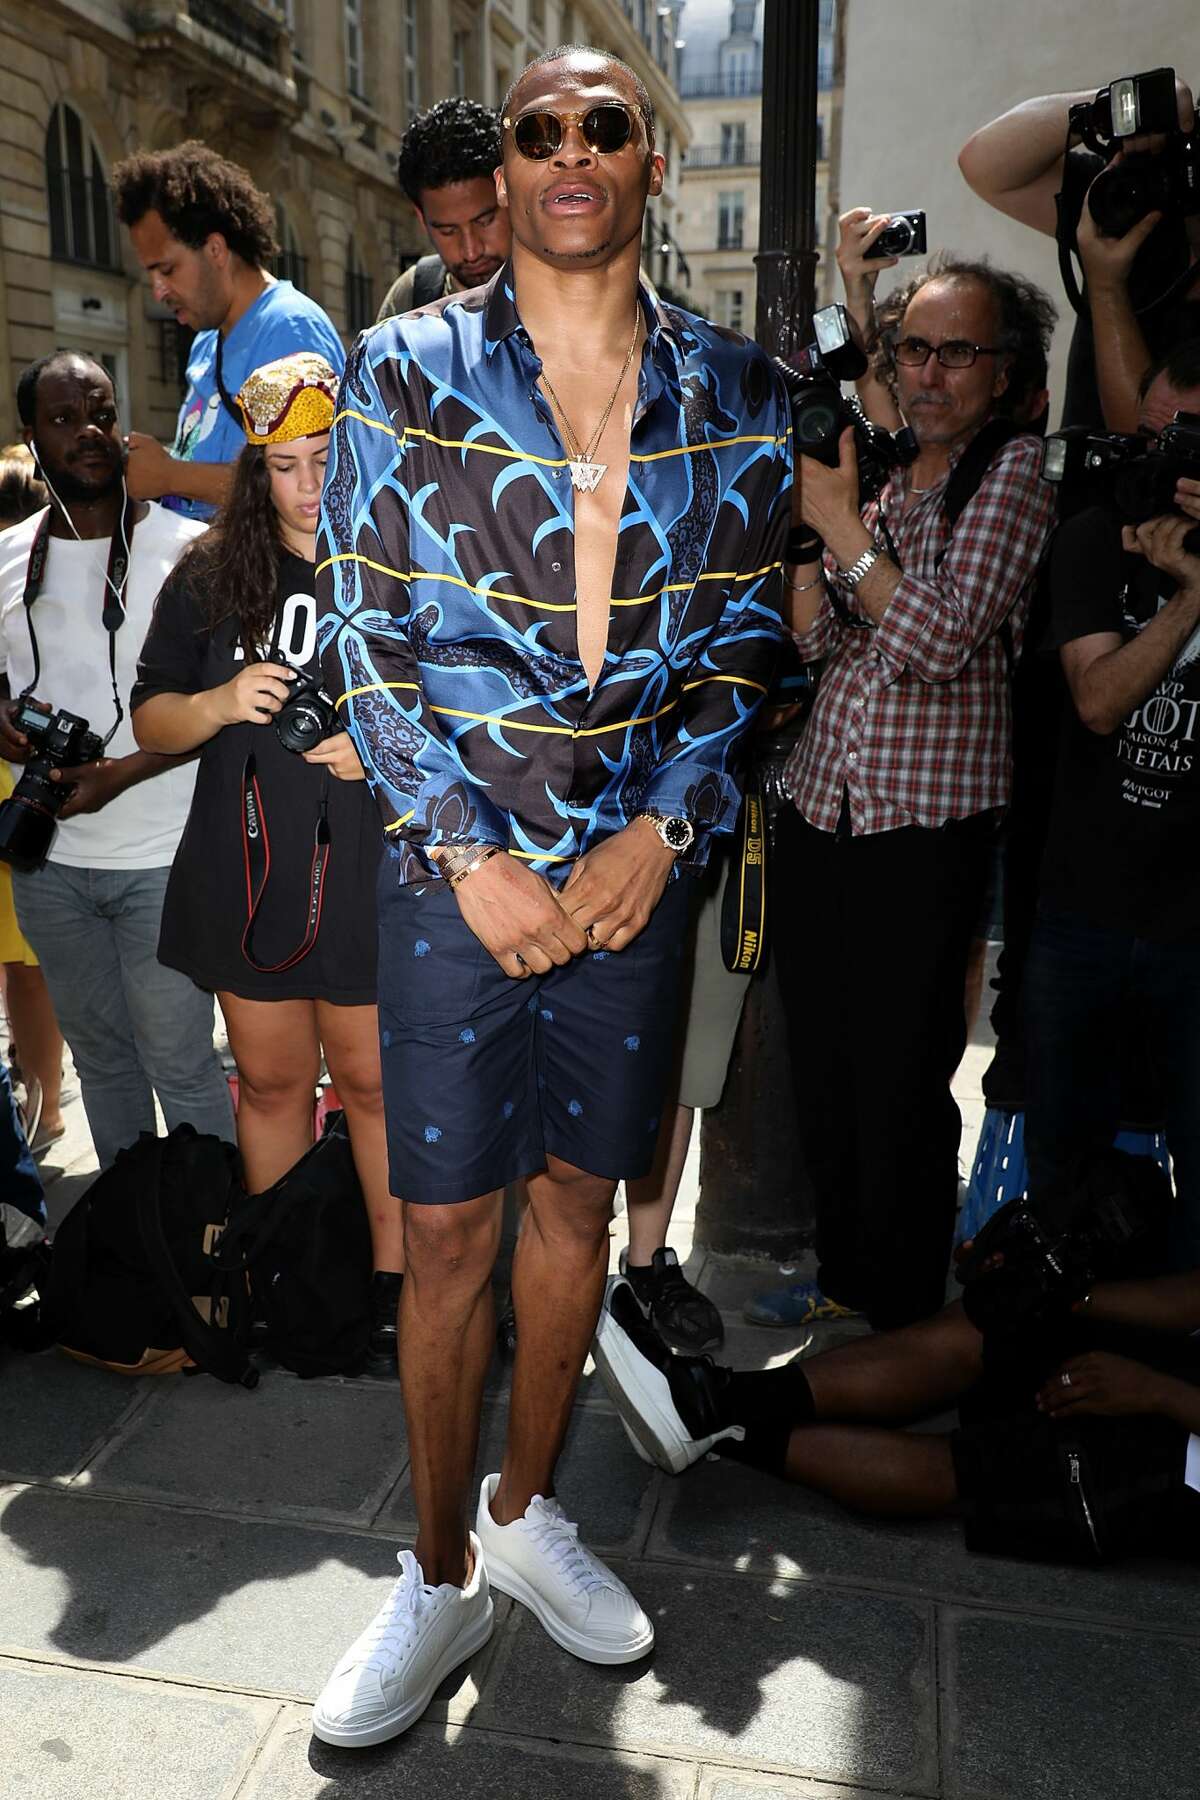 PARIS, FRANCE - JUNE 22: Russell Westbrook arrives at the Louis Vuitton show during the Paris Fashion Week - Menswear Spring/Summer 2018 on June 22, 2017 in Paris, France. (Photo by Pierre Suu/GC Images)